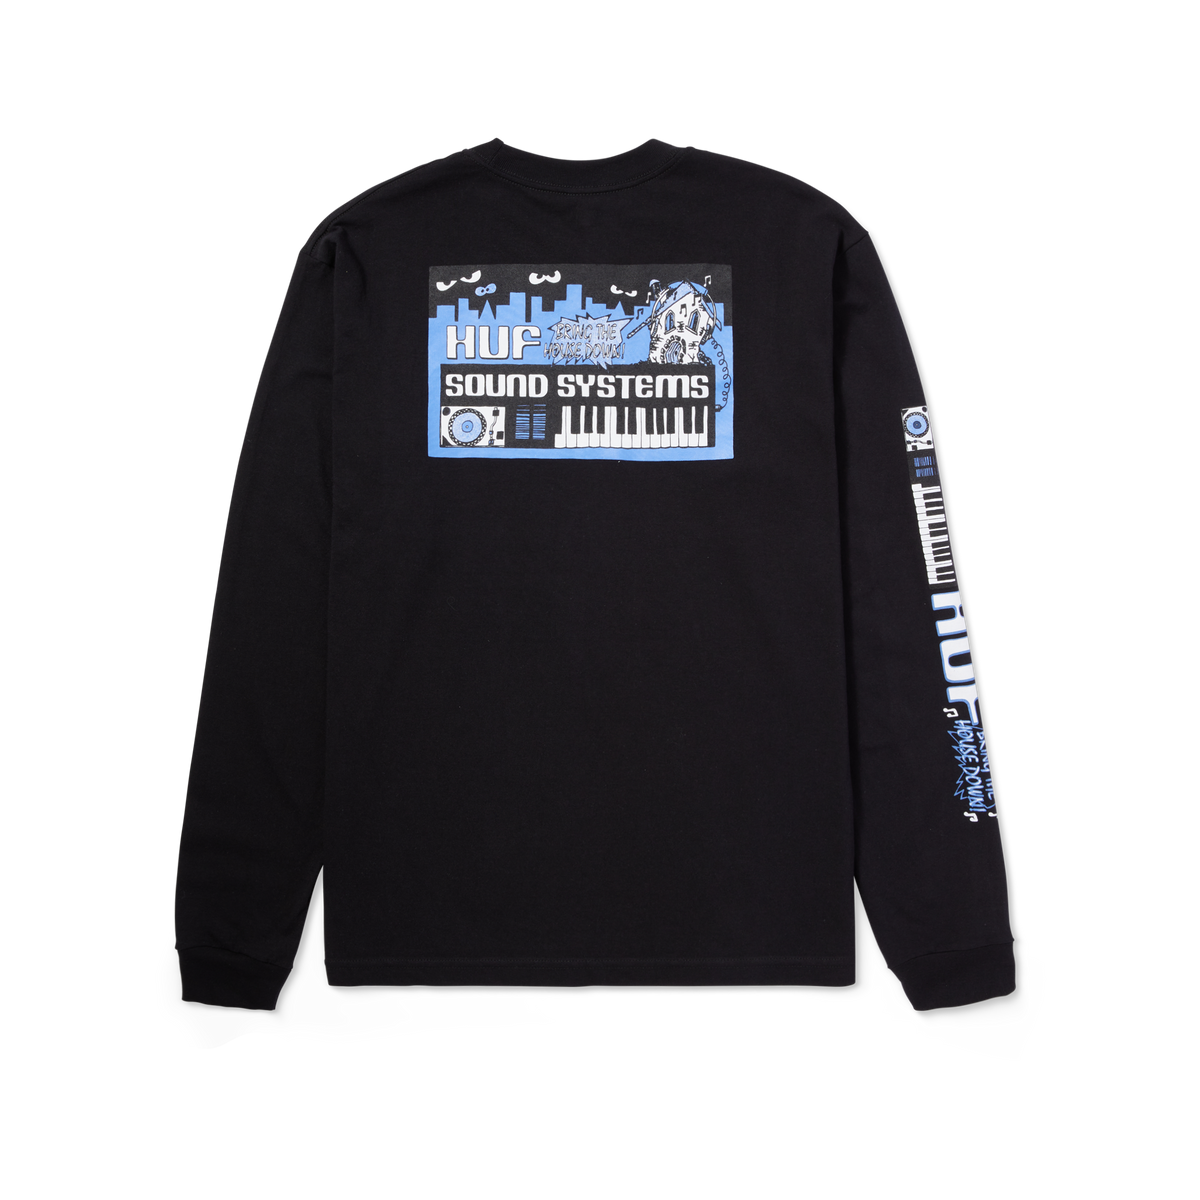 Sound Systems Long Sleeve T-Shirt